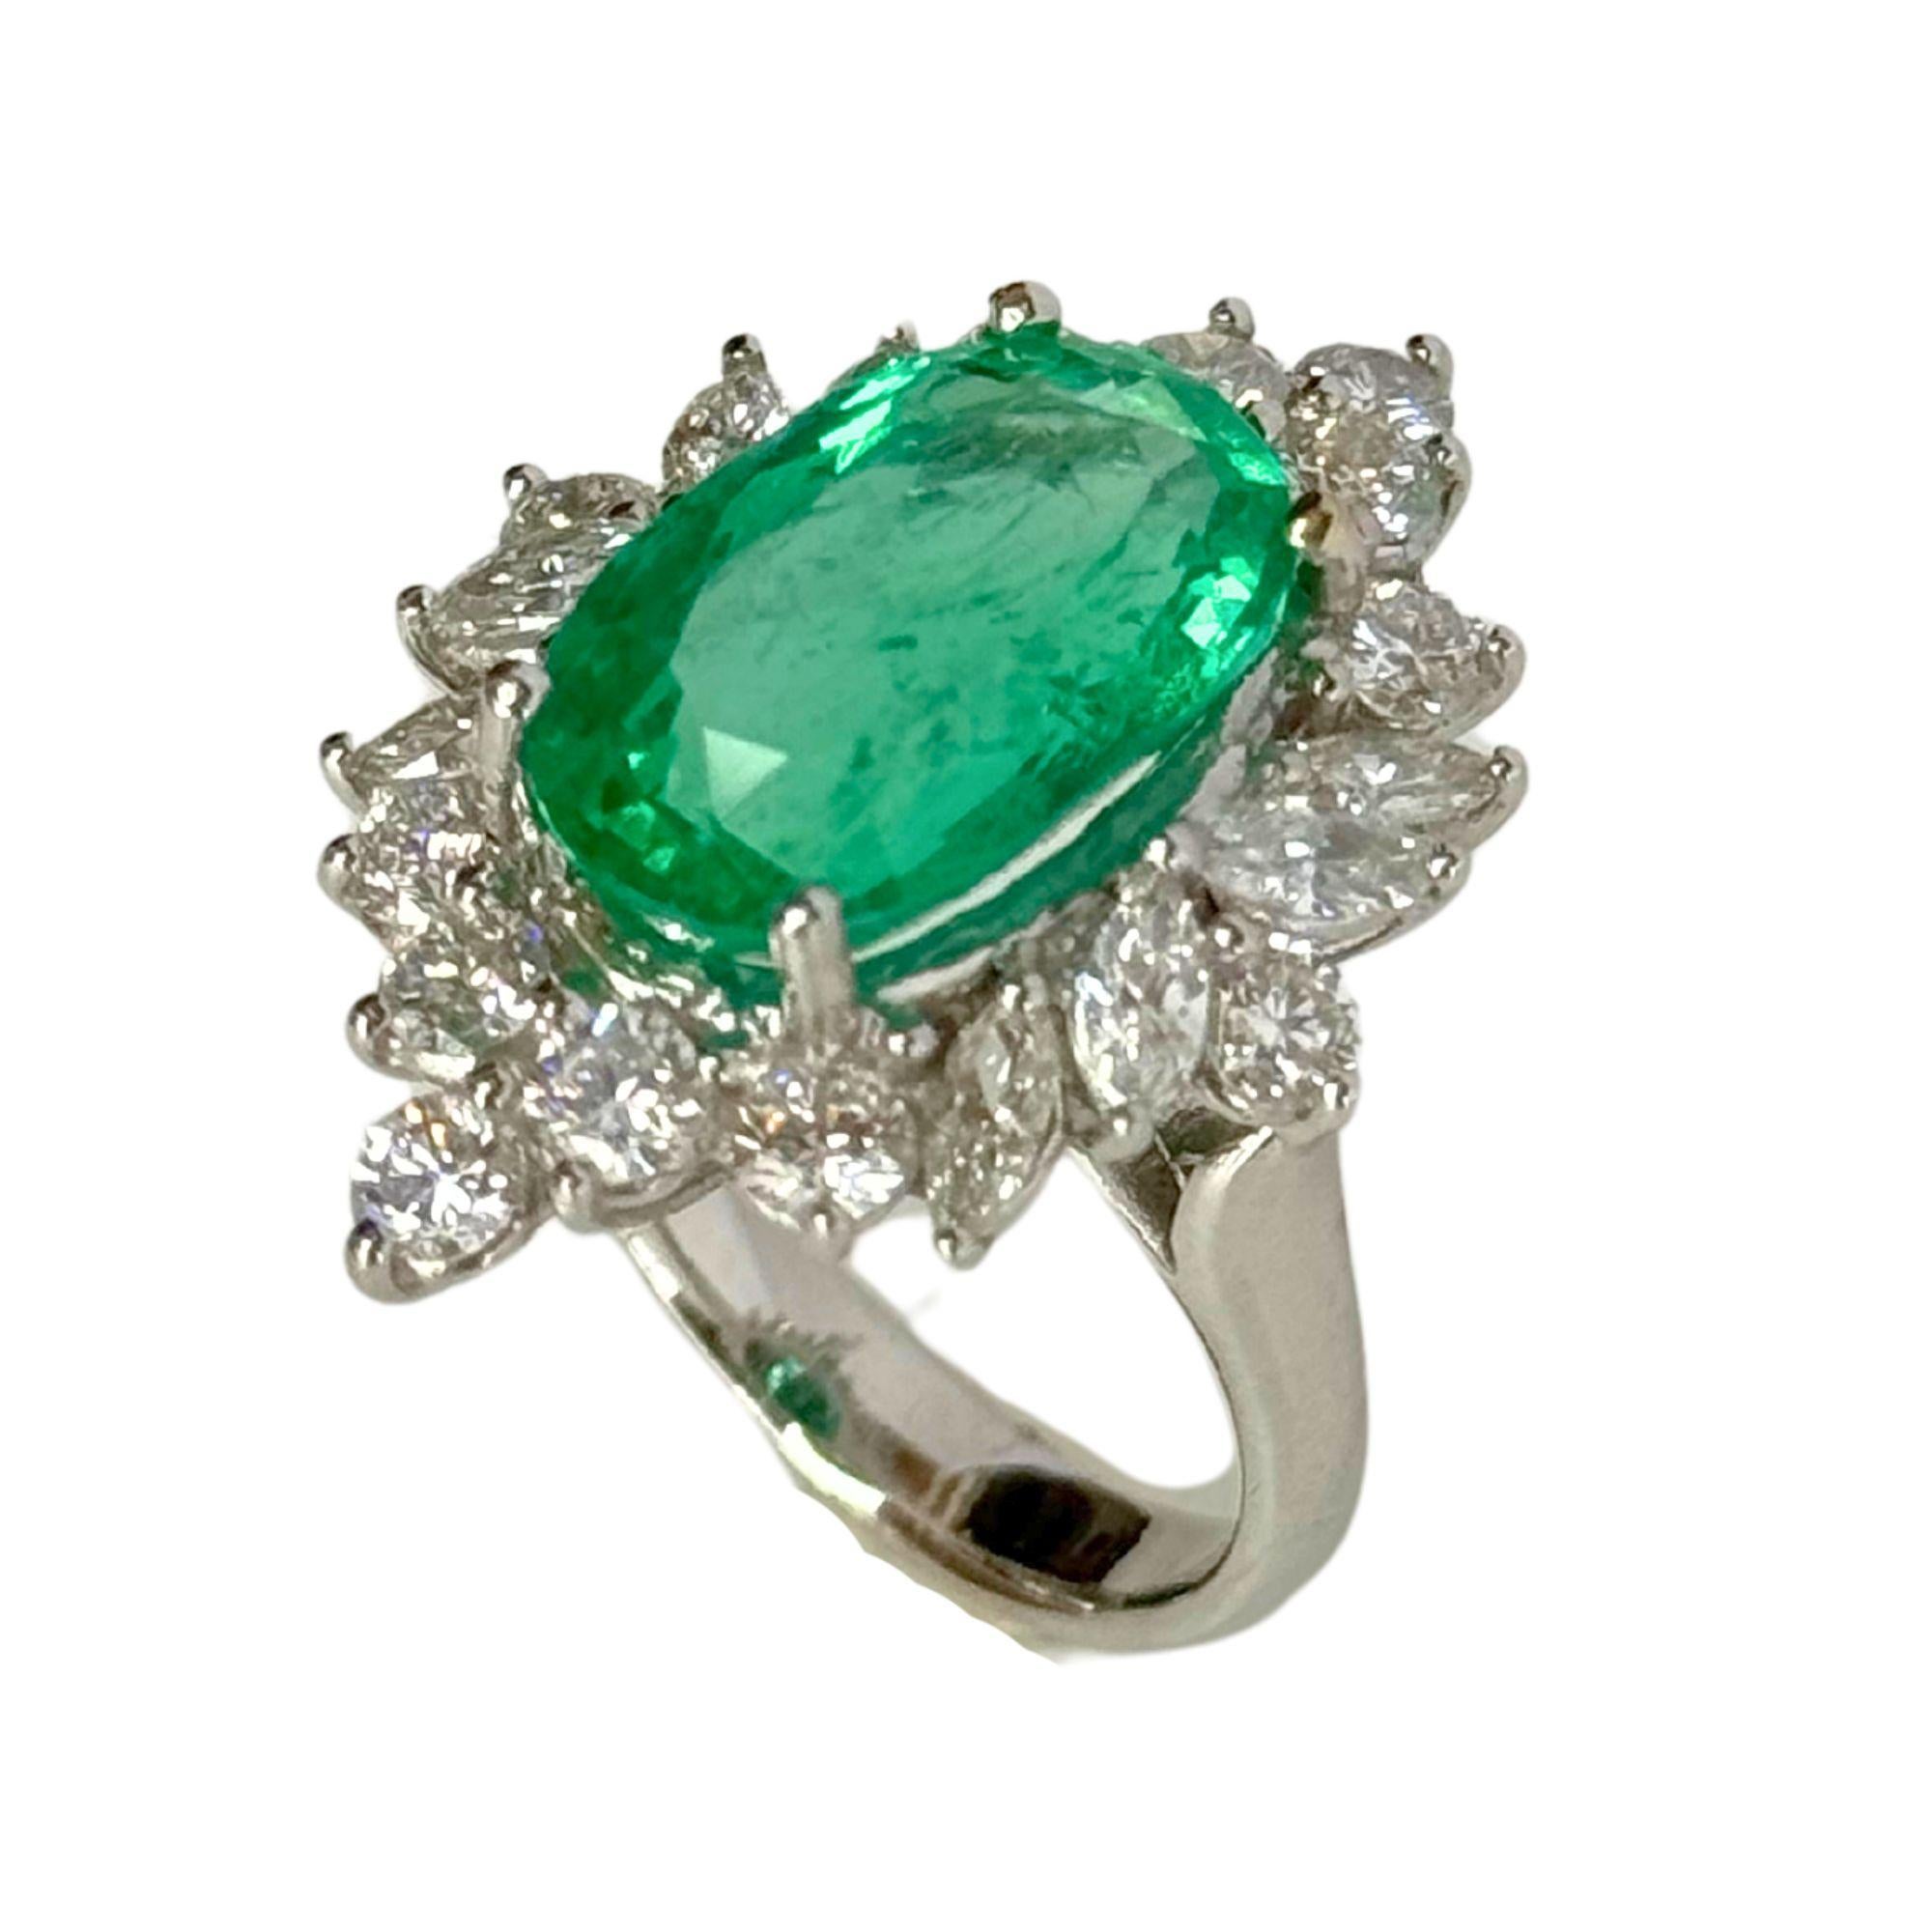 Elevate your style with our stunning GIA Certified 18k Diamond and Emerald Ring. Crafted in 18k white gold with a total weight of 8.59 grams, this ring boasts a sparkling 1.93 carat diamond and a stunning 5.68 carat Columbian emerald in the center.